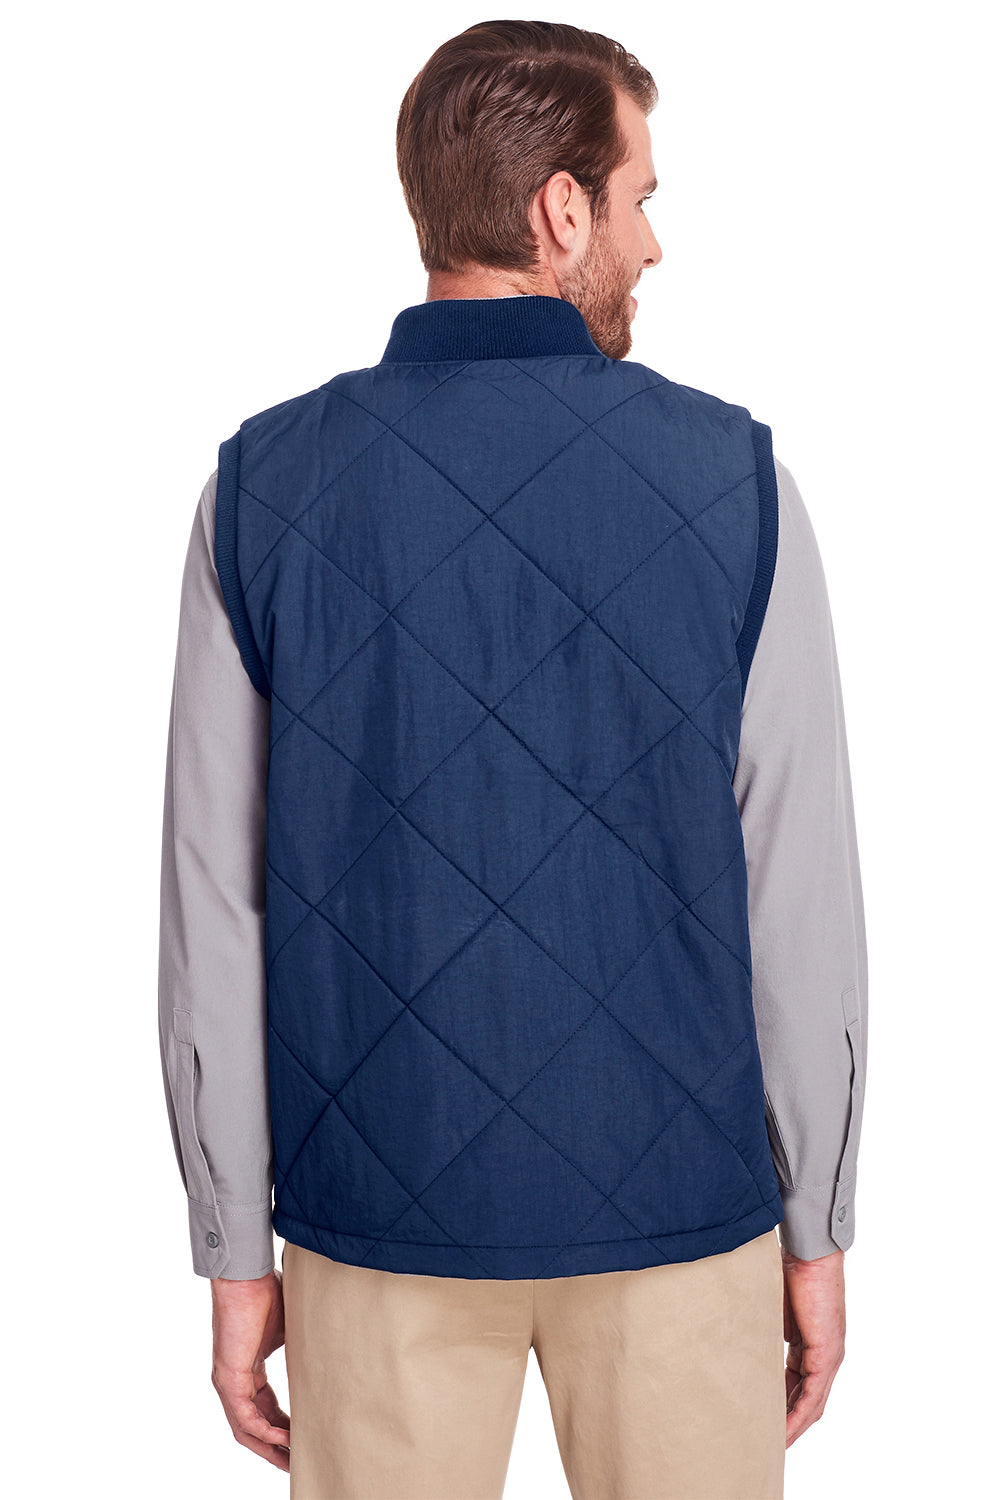 UltraClub UC709 Mens Dawson Quilted Full Zip Vest Navy Blue Back